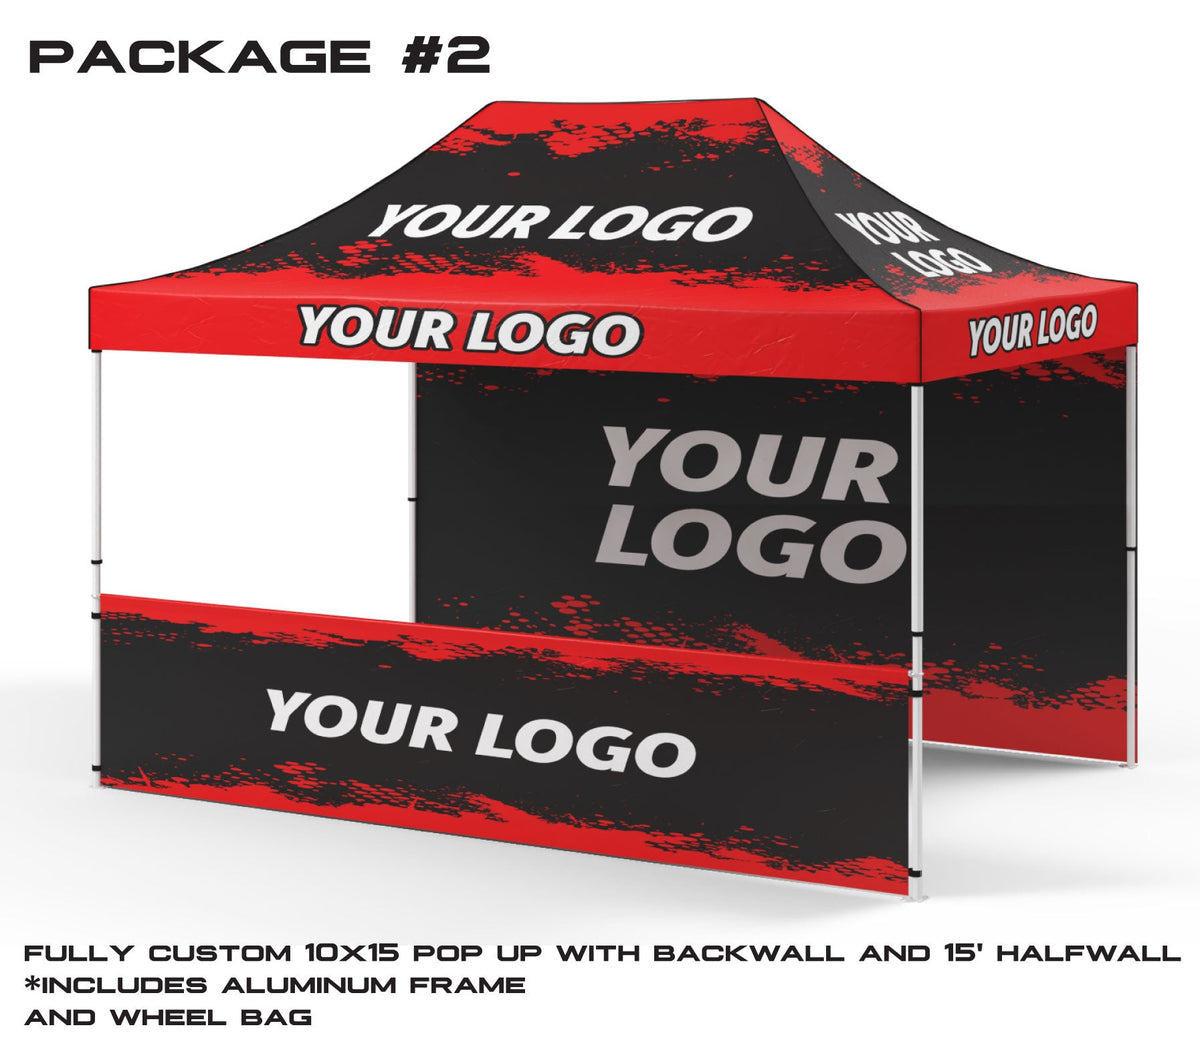 10x15 Package #2